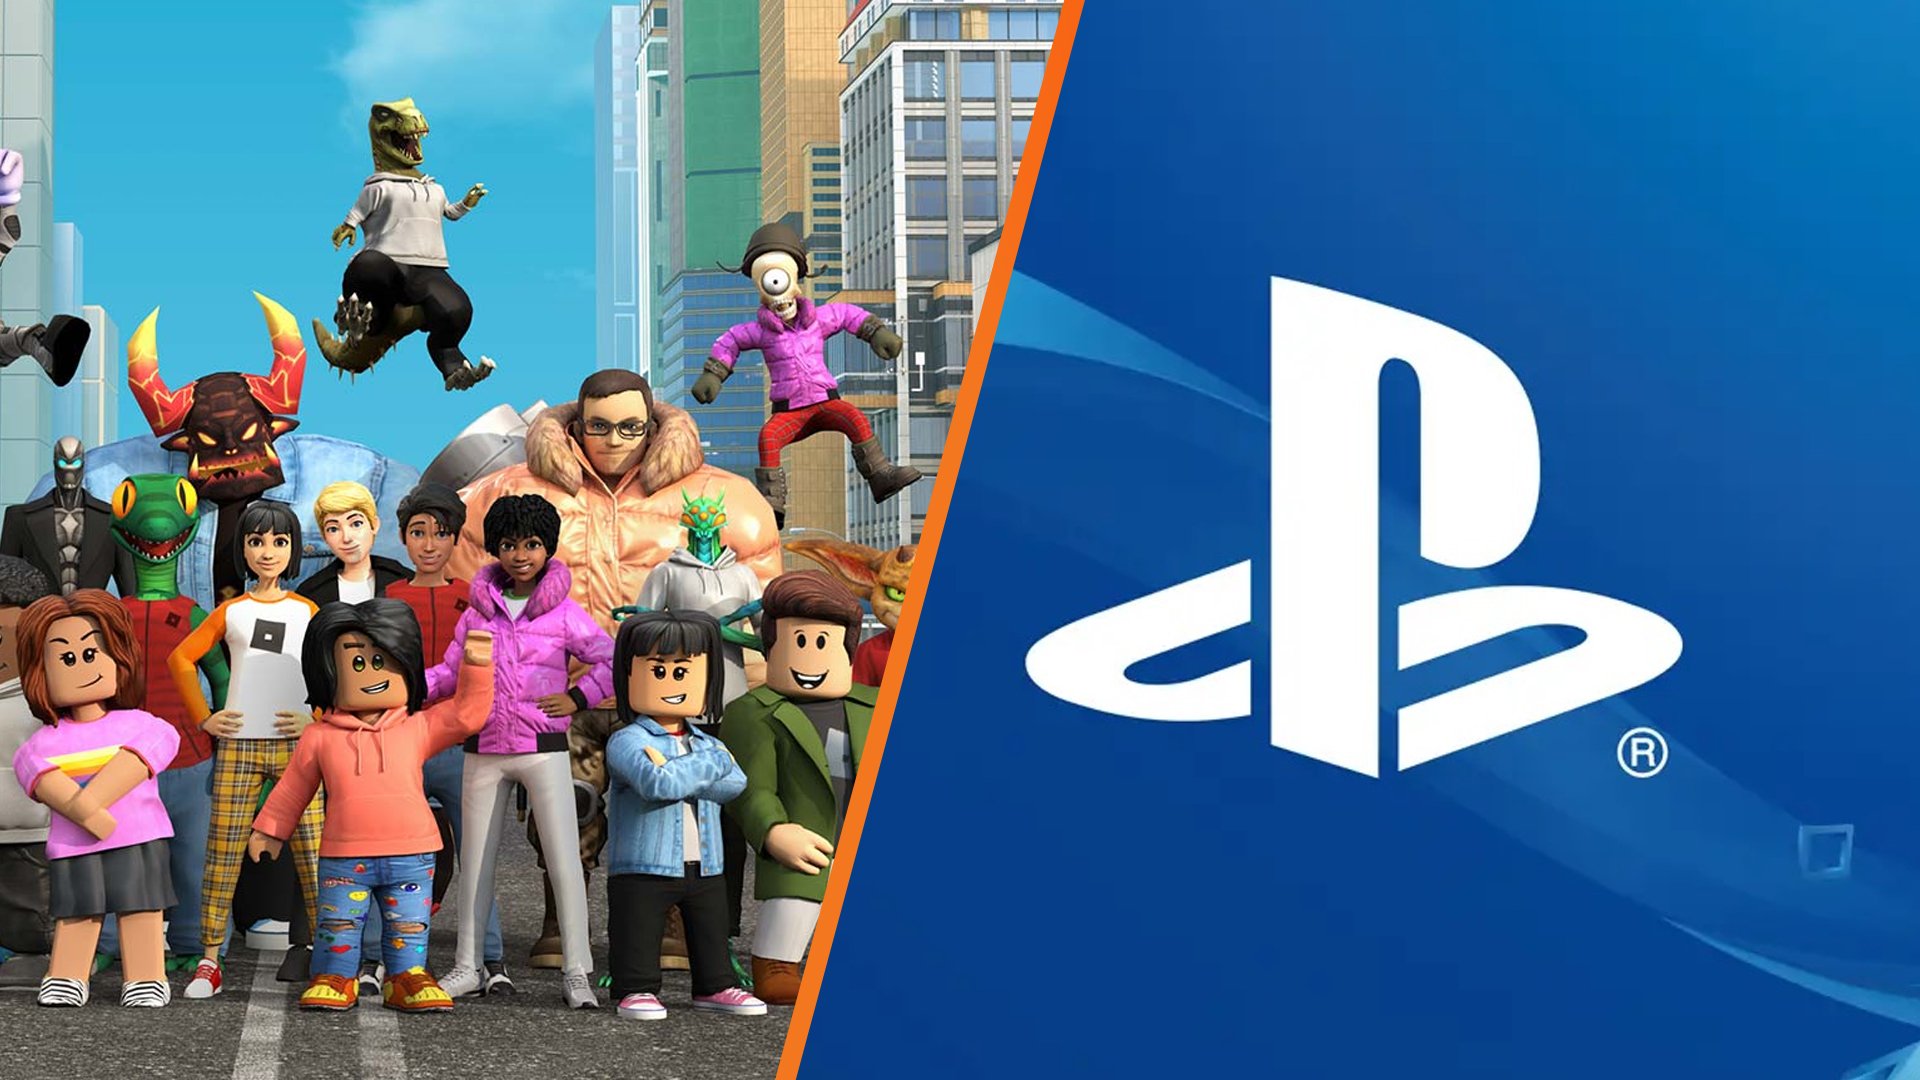 Is Roblox cross platform on PS4 and PS5?